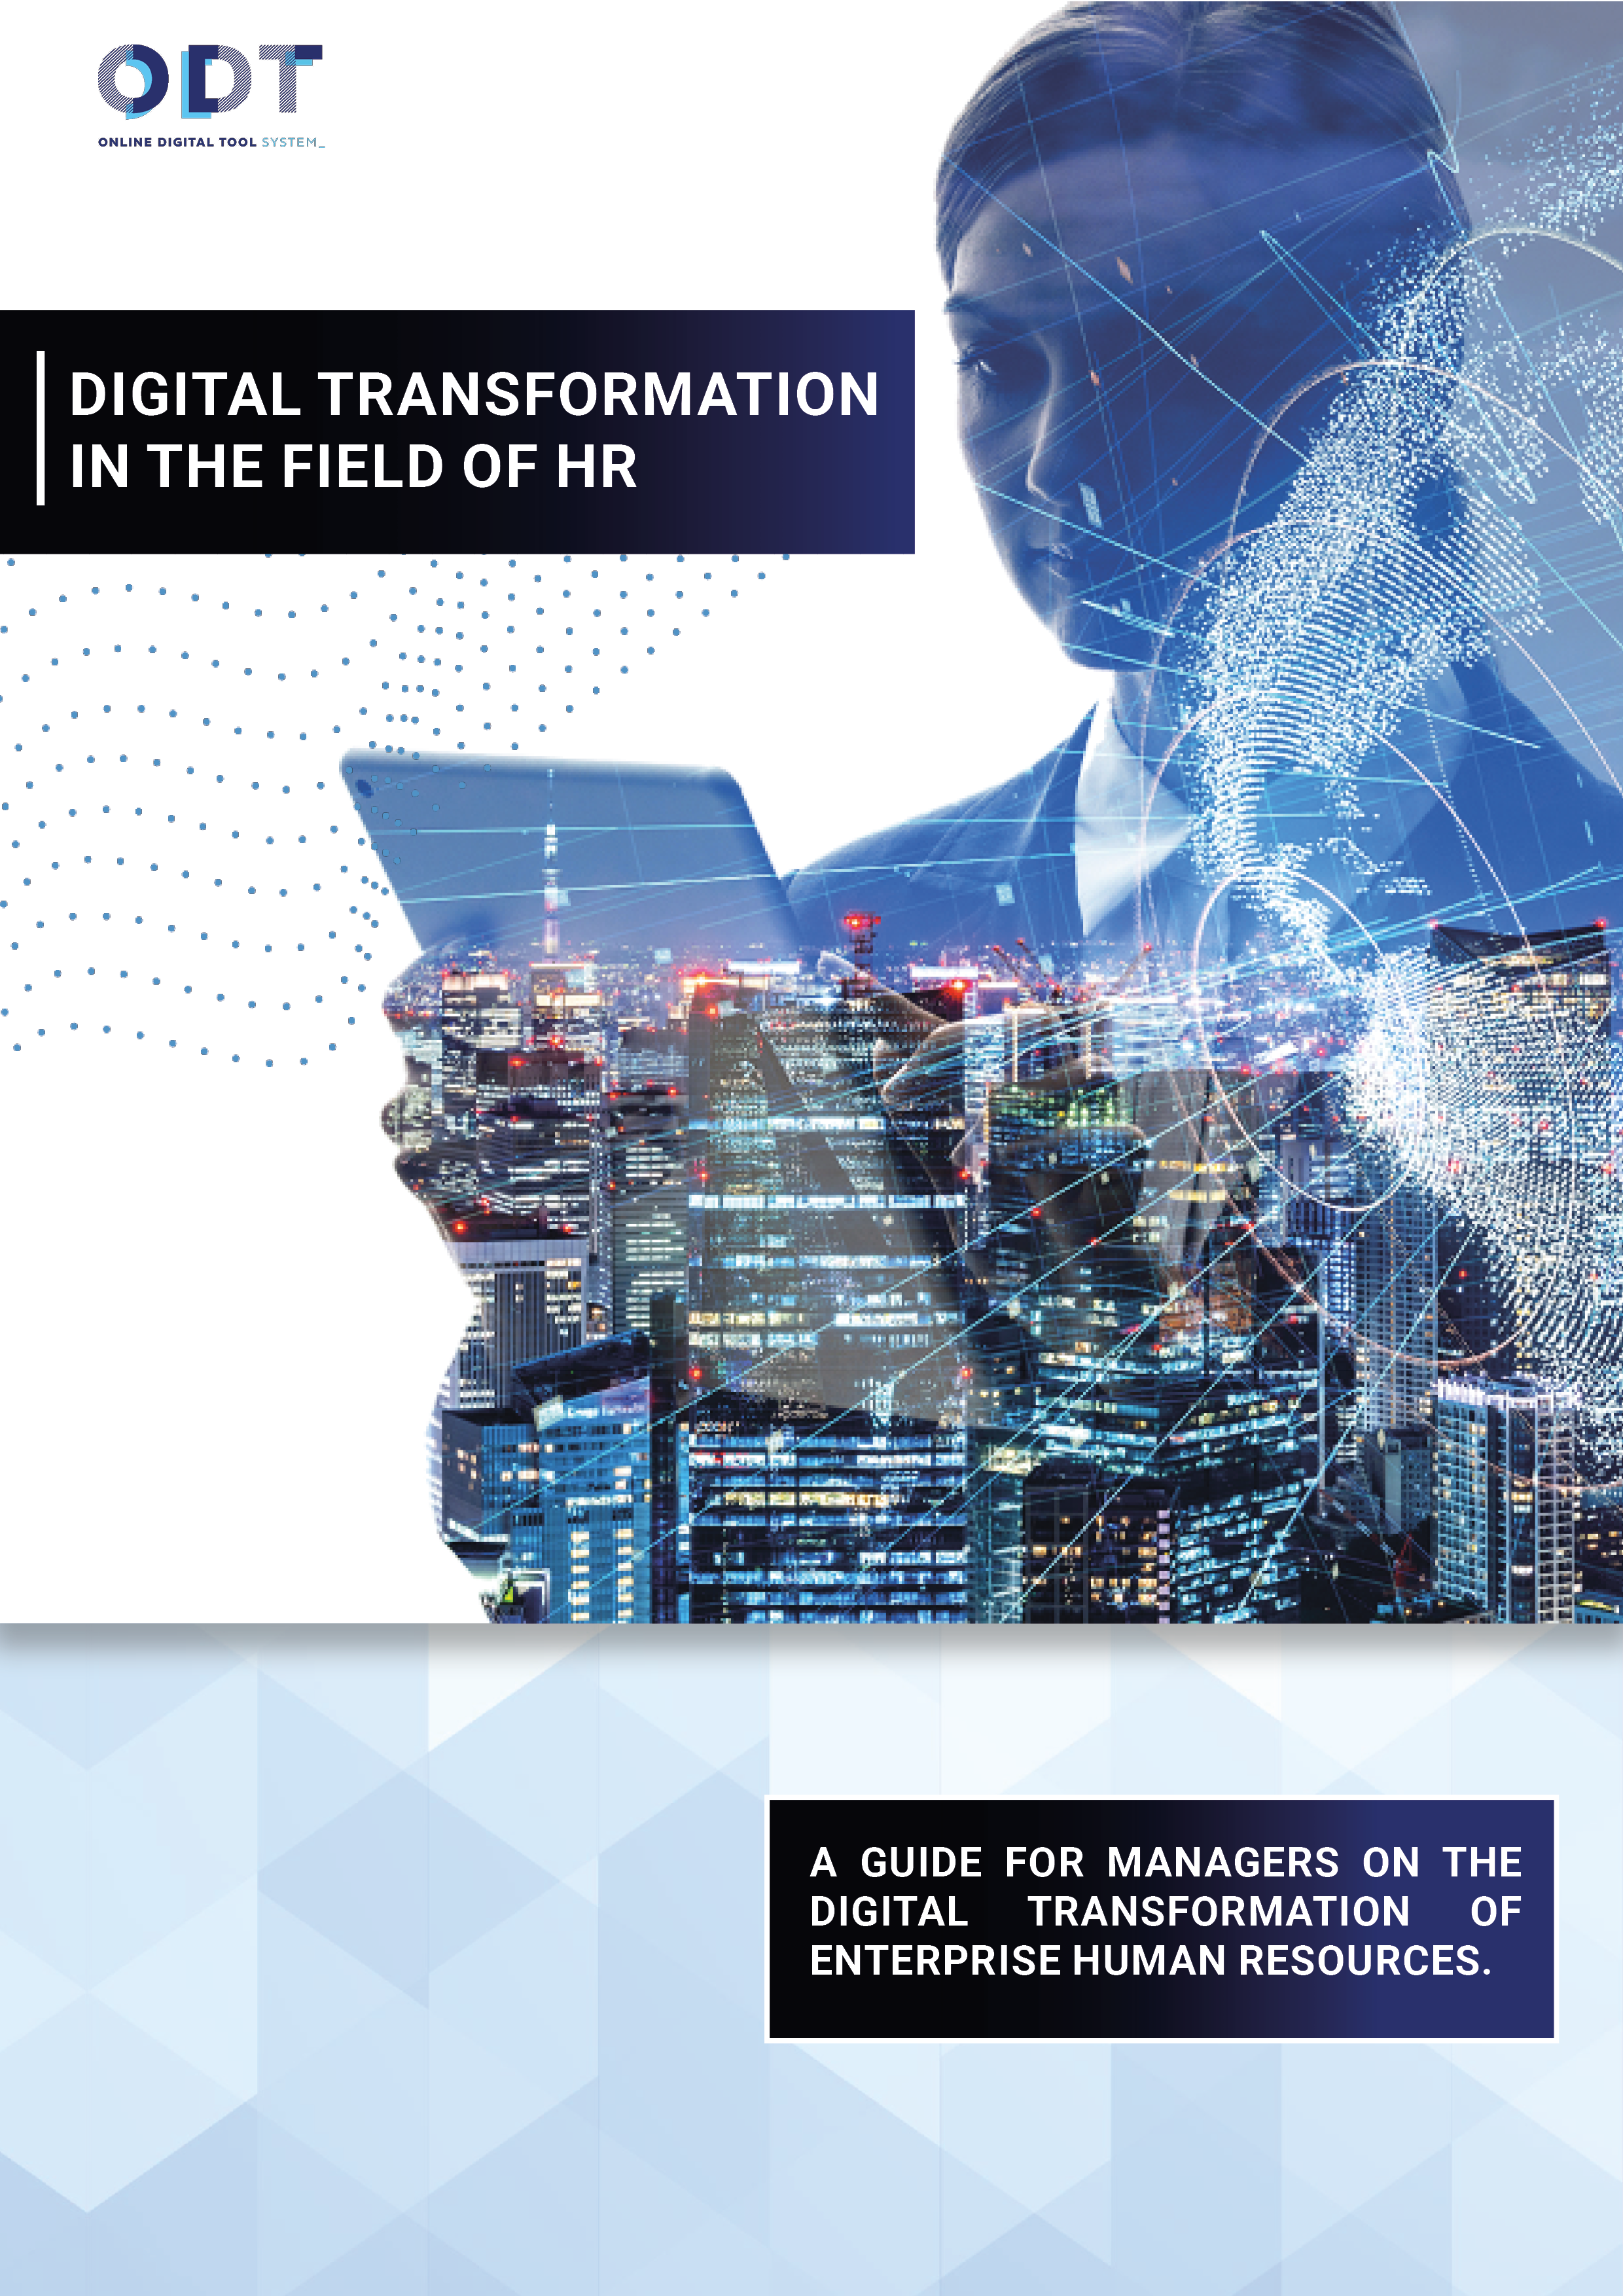 ODT SYSTEM - DIGITAL TRANSFORMATION IN THE FIELD OF HR COVER